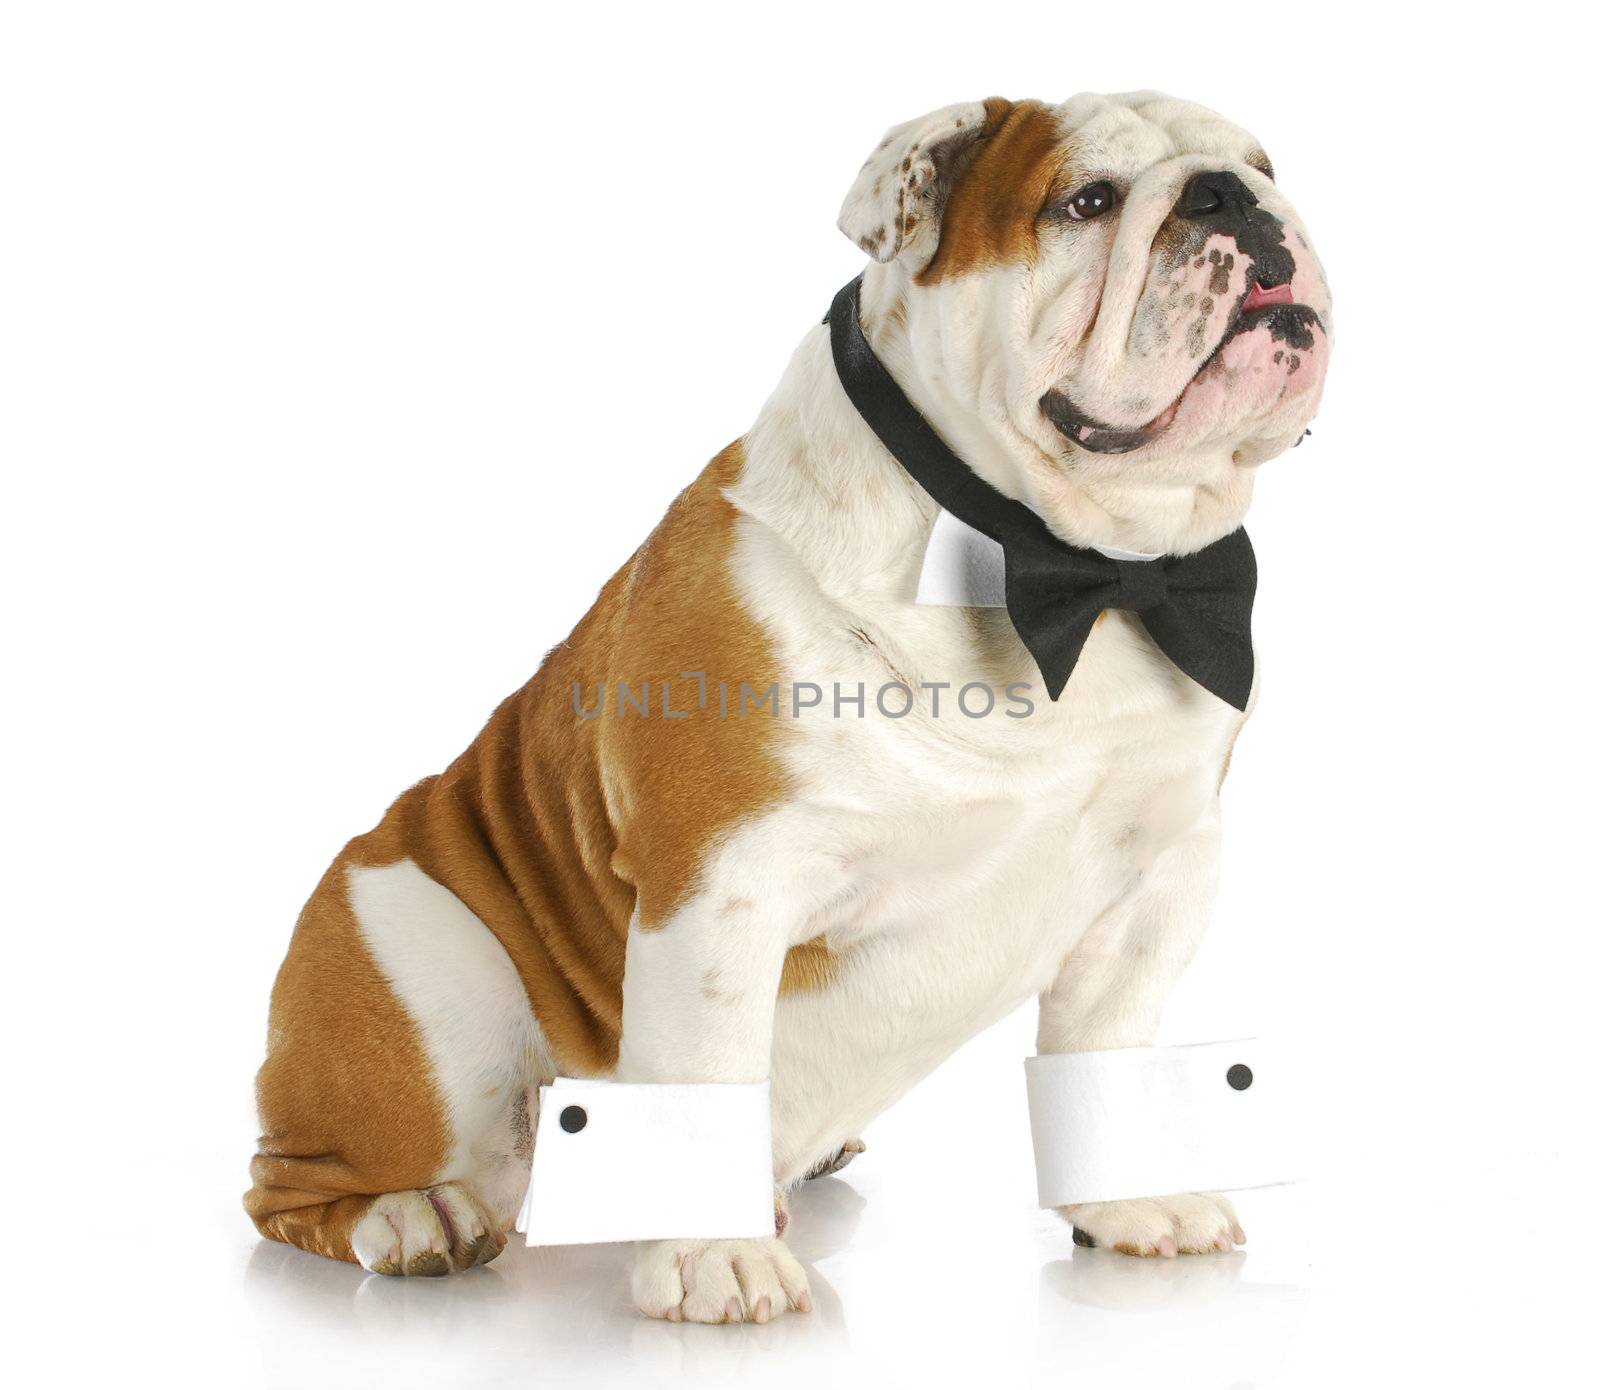 male dog - english bulldog dressed up wearing bowtie and cuffs on white background